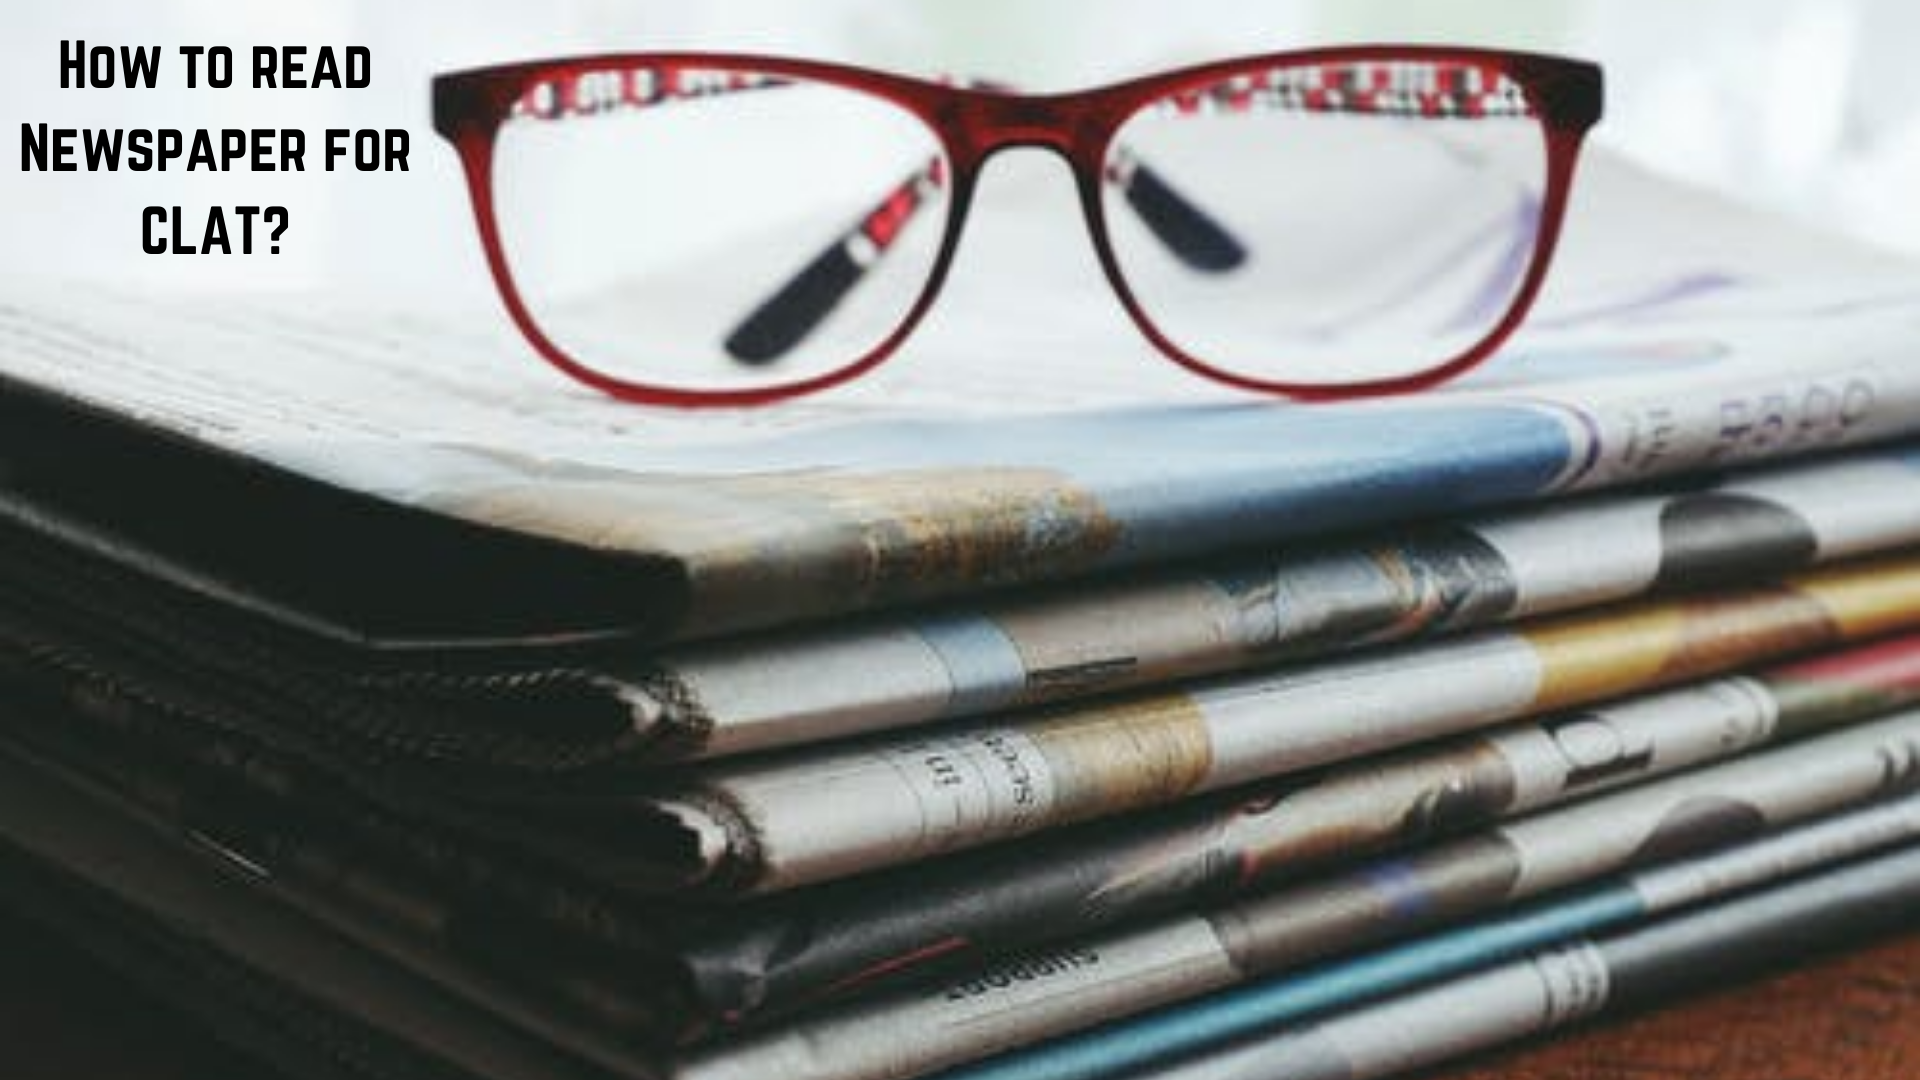 How to Read Newspaper while preparing for CLAT